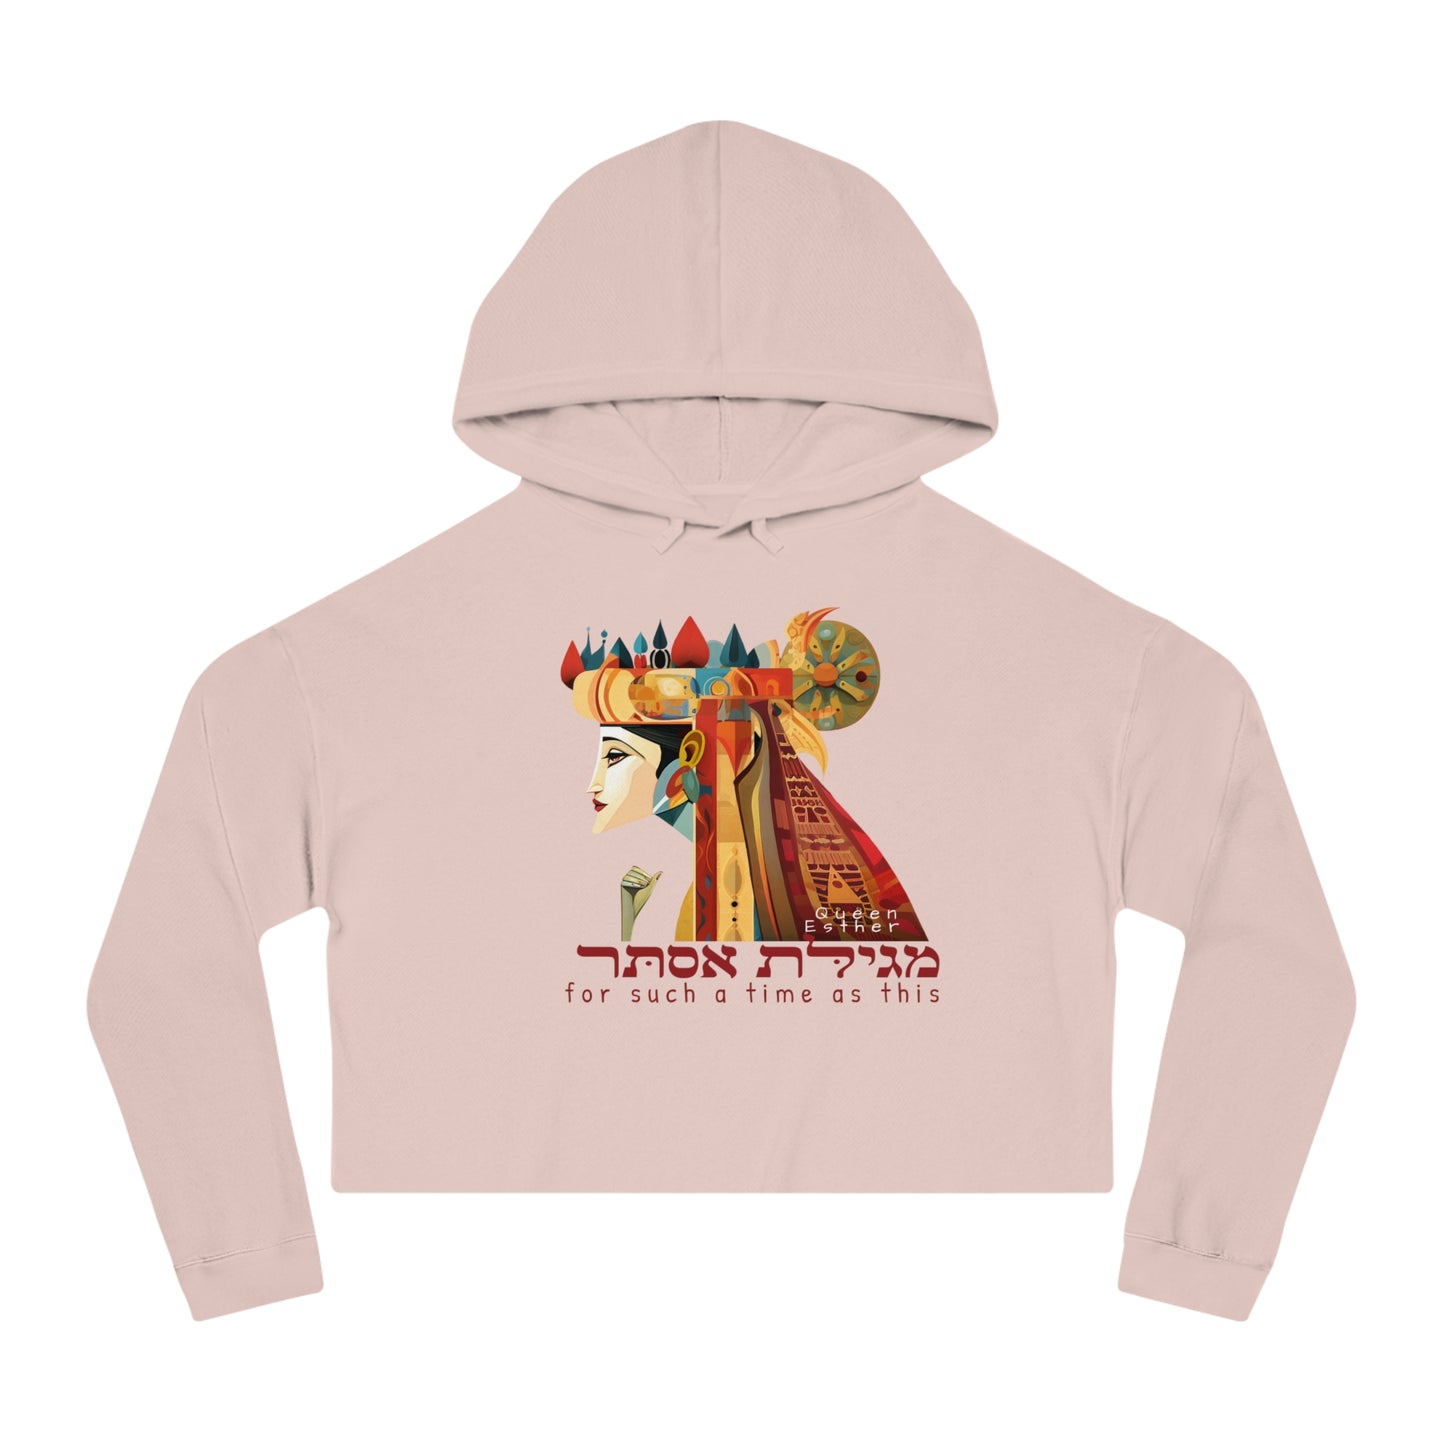 Purim Queen Esther For such time as this Women’s Cropped Hooded Sweatshirt